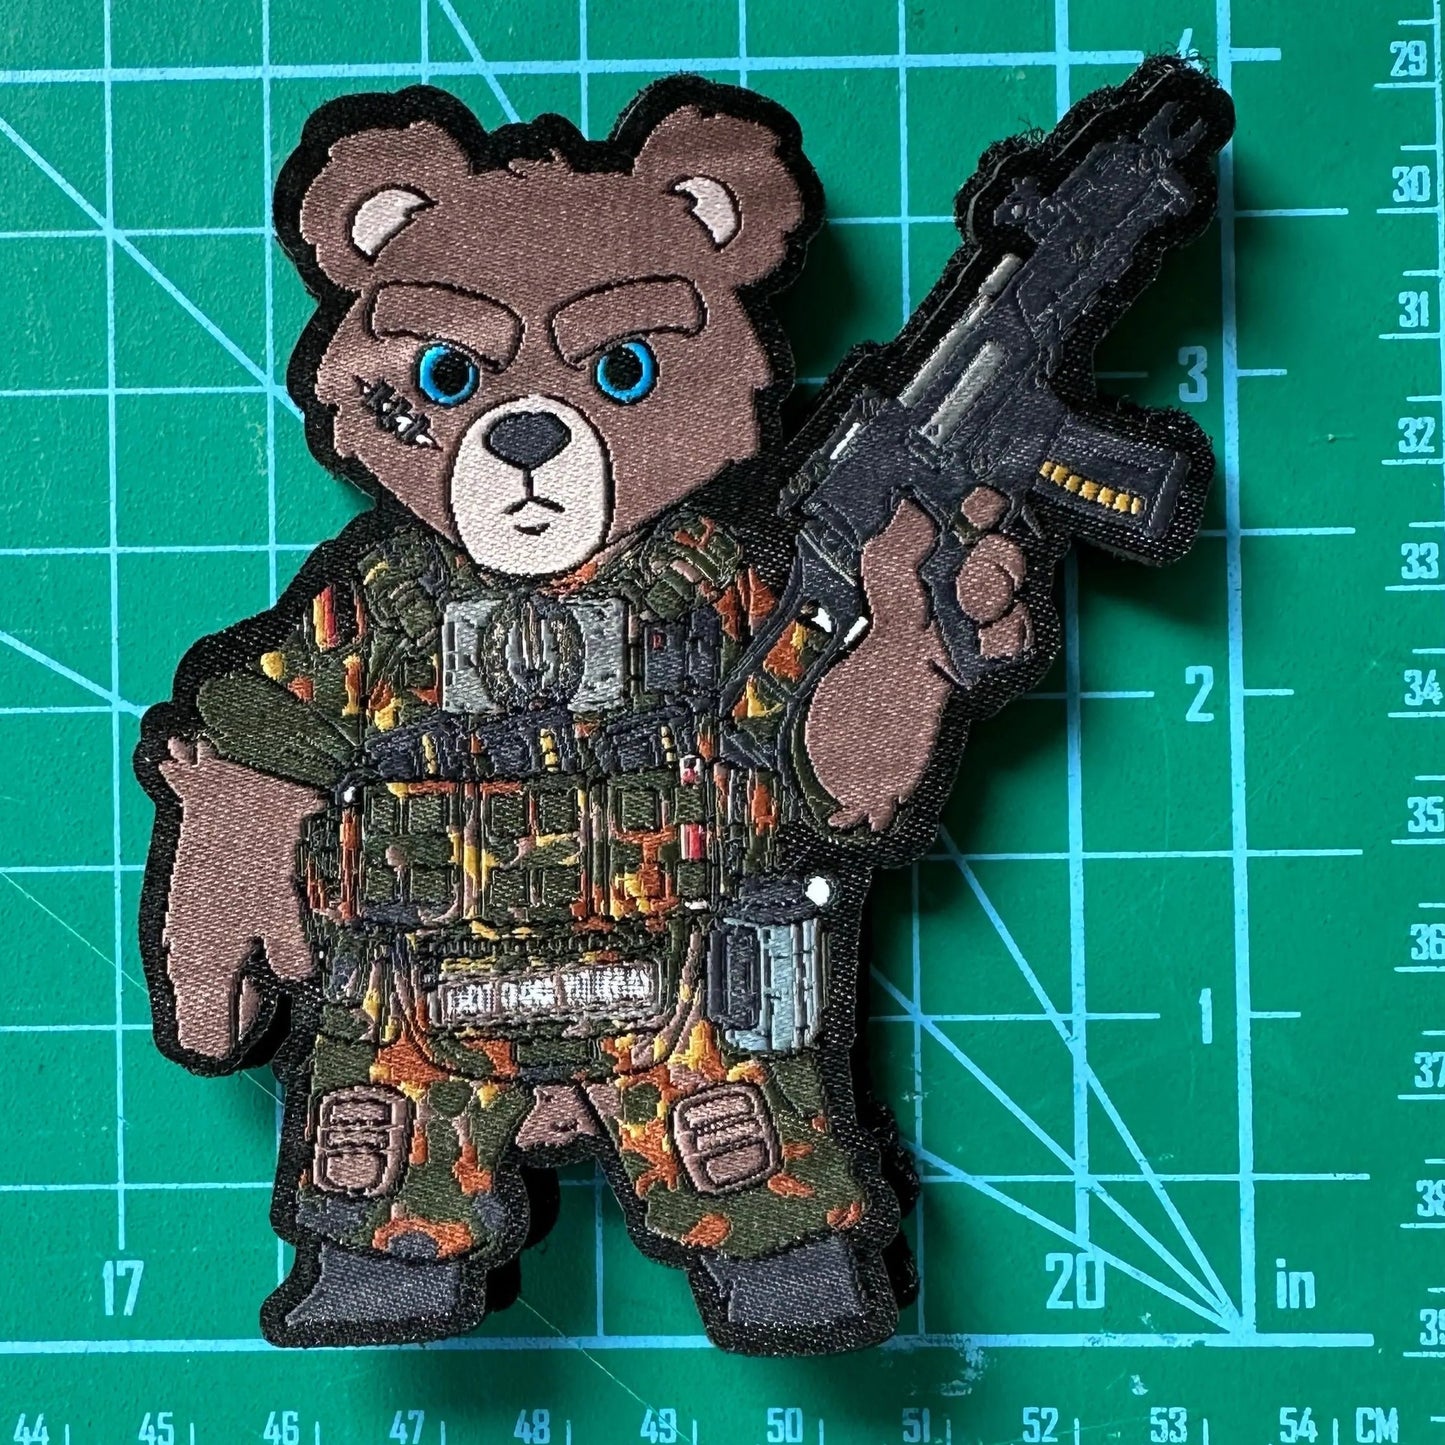 KSK TEDDY WOVEN patchlab